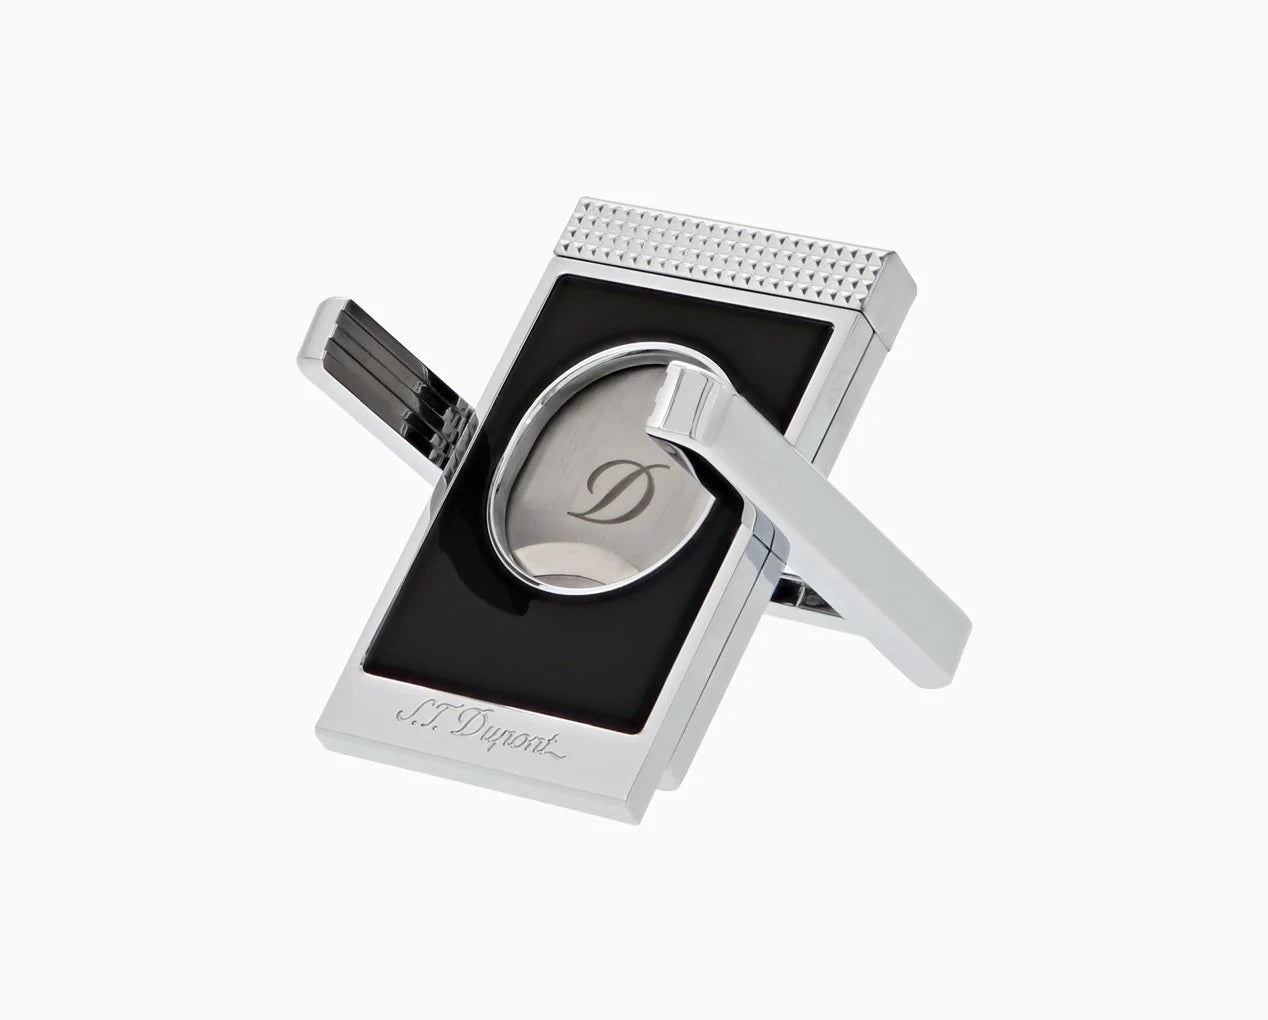 Cigar Cutter/Stand by ST Dupont